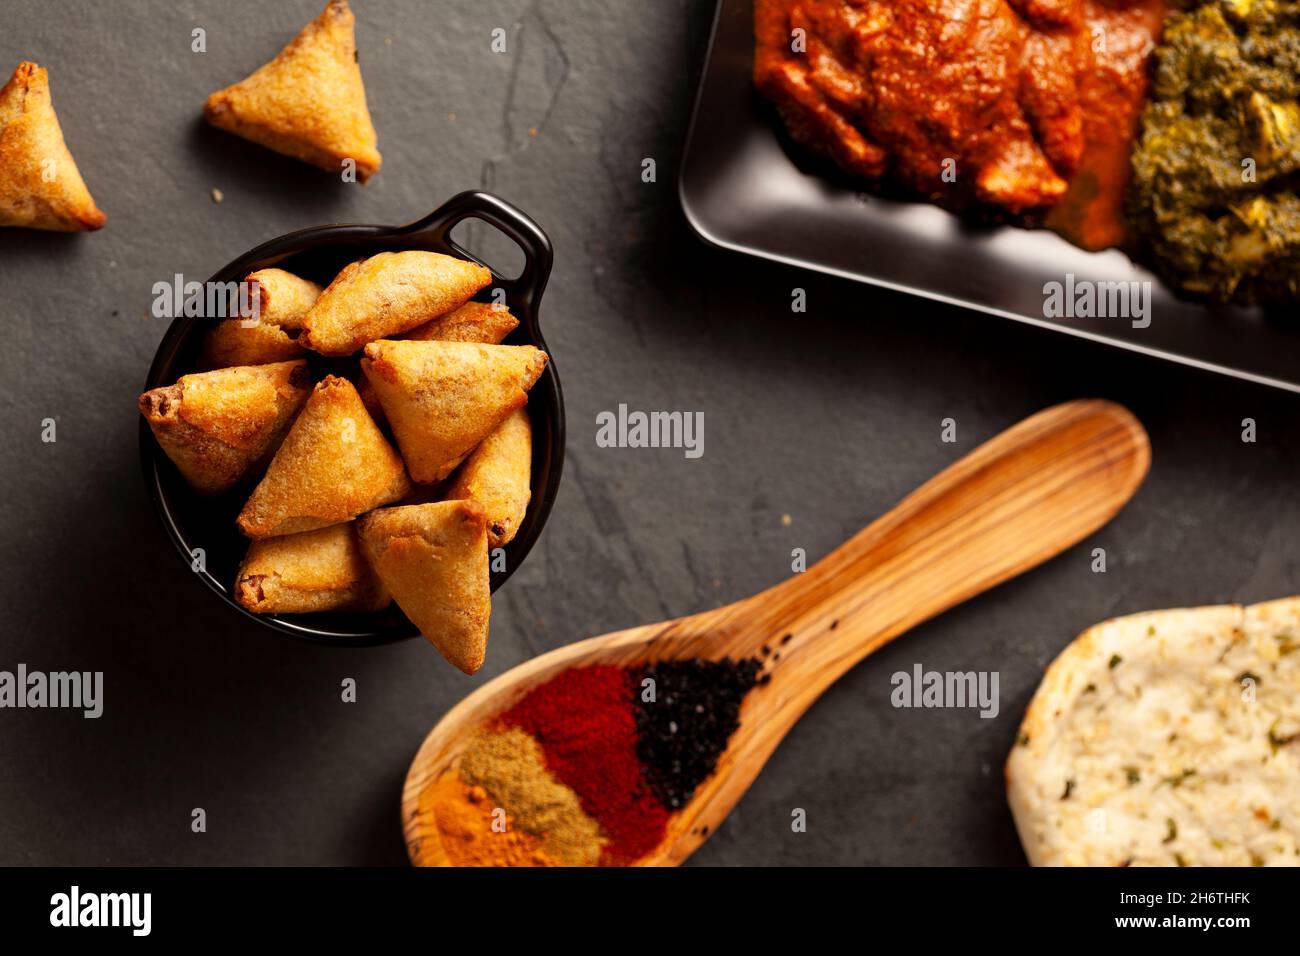 Close up image of a table with delicious dishes from India. Low light dark background with naan, curry chicken, palak paneer, samosa, various spices a Stock Photo